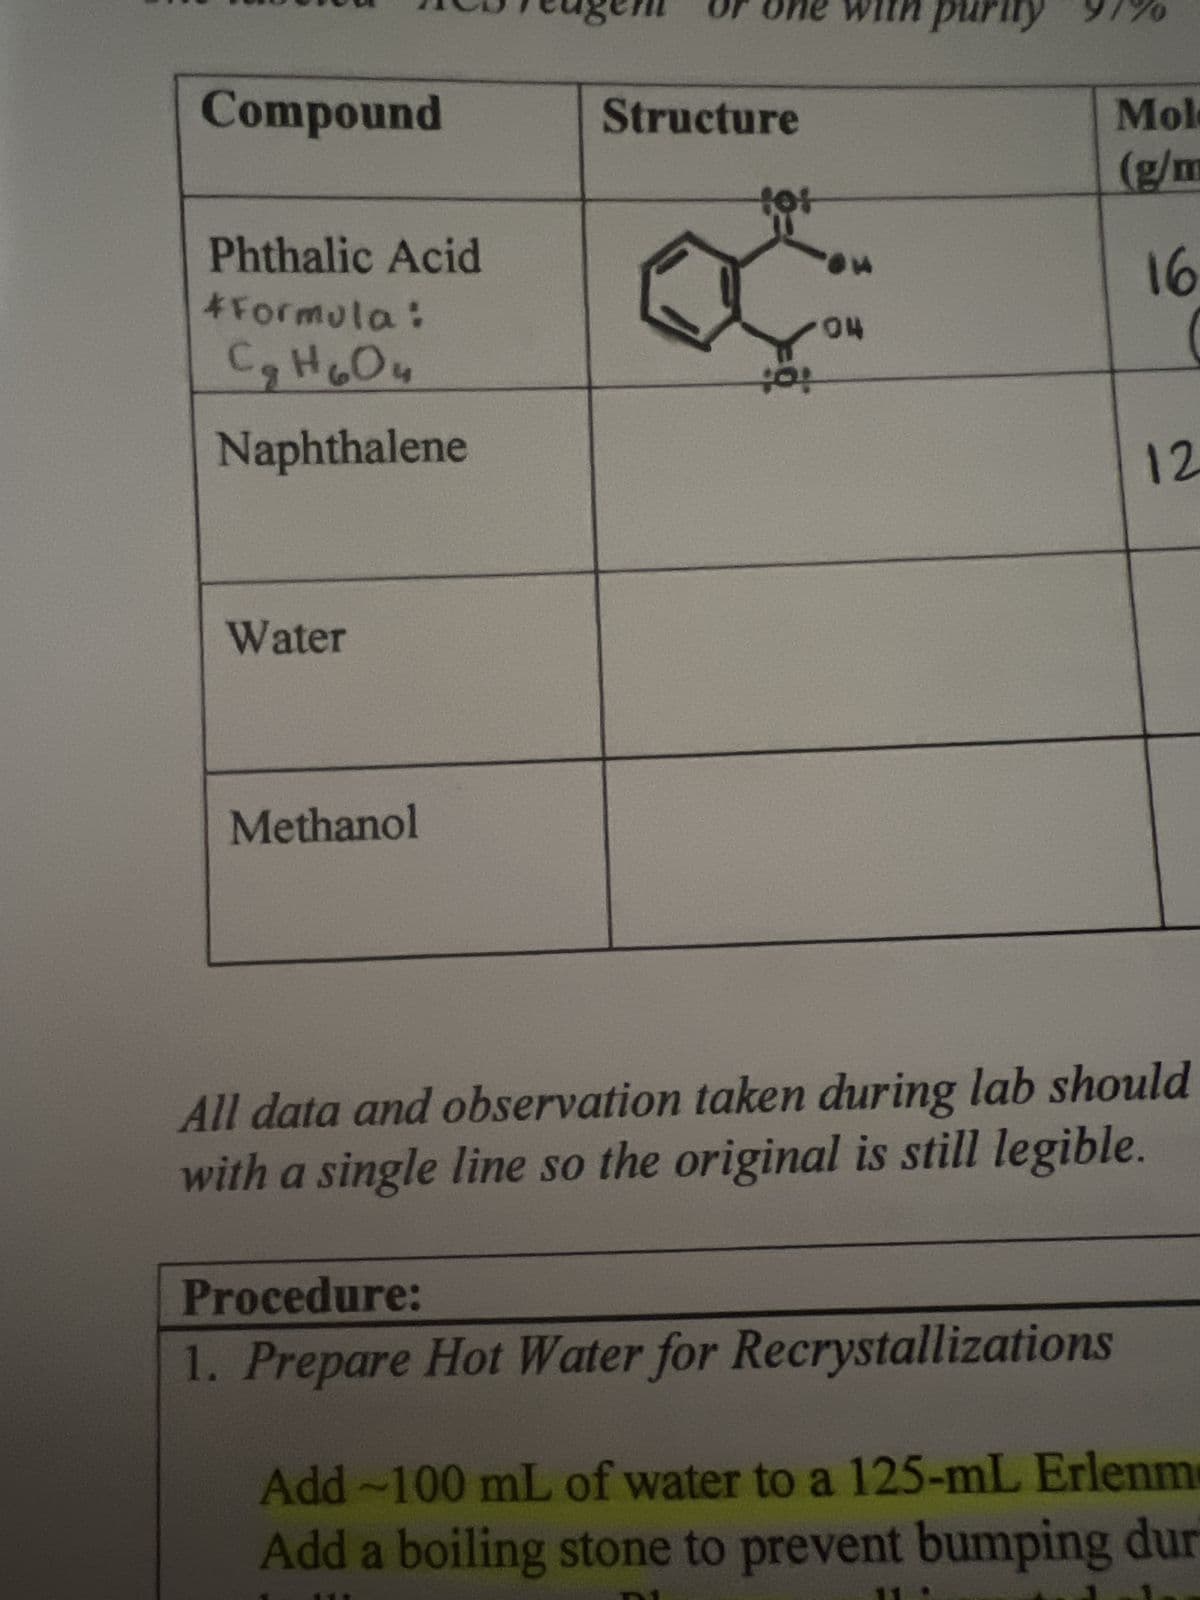 Compound
Phthalic Acid
*Formula:
C ₂ H 6 Ou
Naphthalene
Water
Methanol
Structure
+01
with purity
Pu
ON
Mol
(g/m
Procedure:
1. Prepare Hot Water for Recrystallizations
16
(
12
All data and observation taken during lab should
with a single line so the original is still legible.
Add-100 mL of water to a 125-mL Erlenme
Add a boiling stone to prevent bumping dur